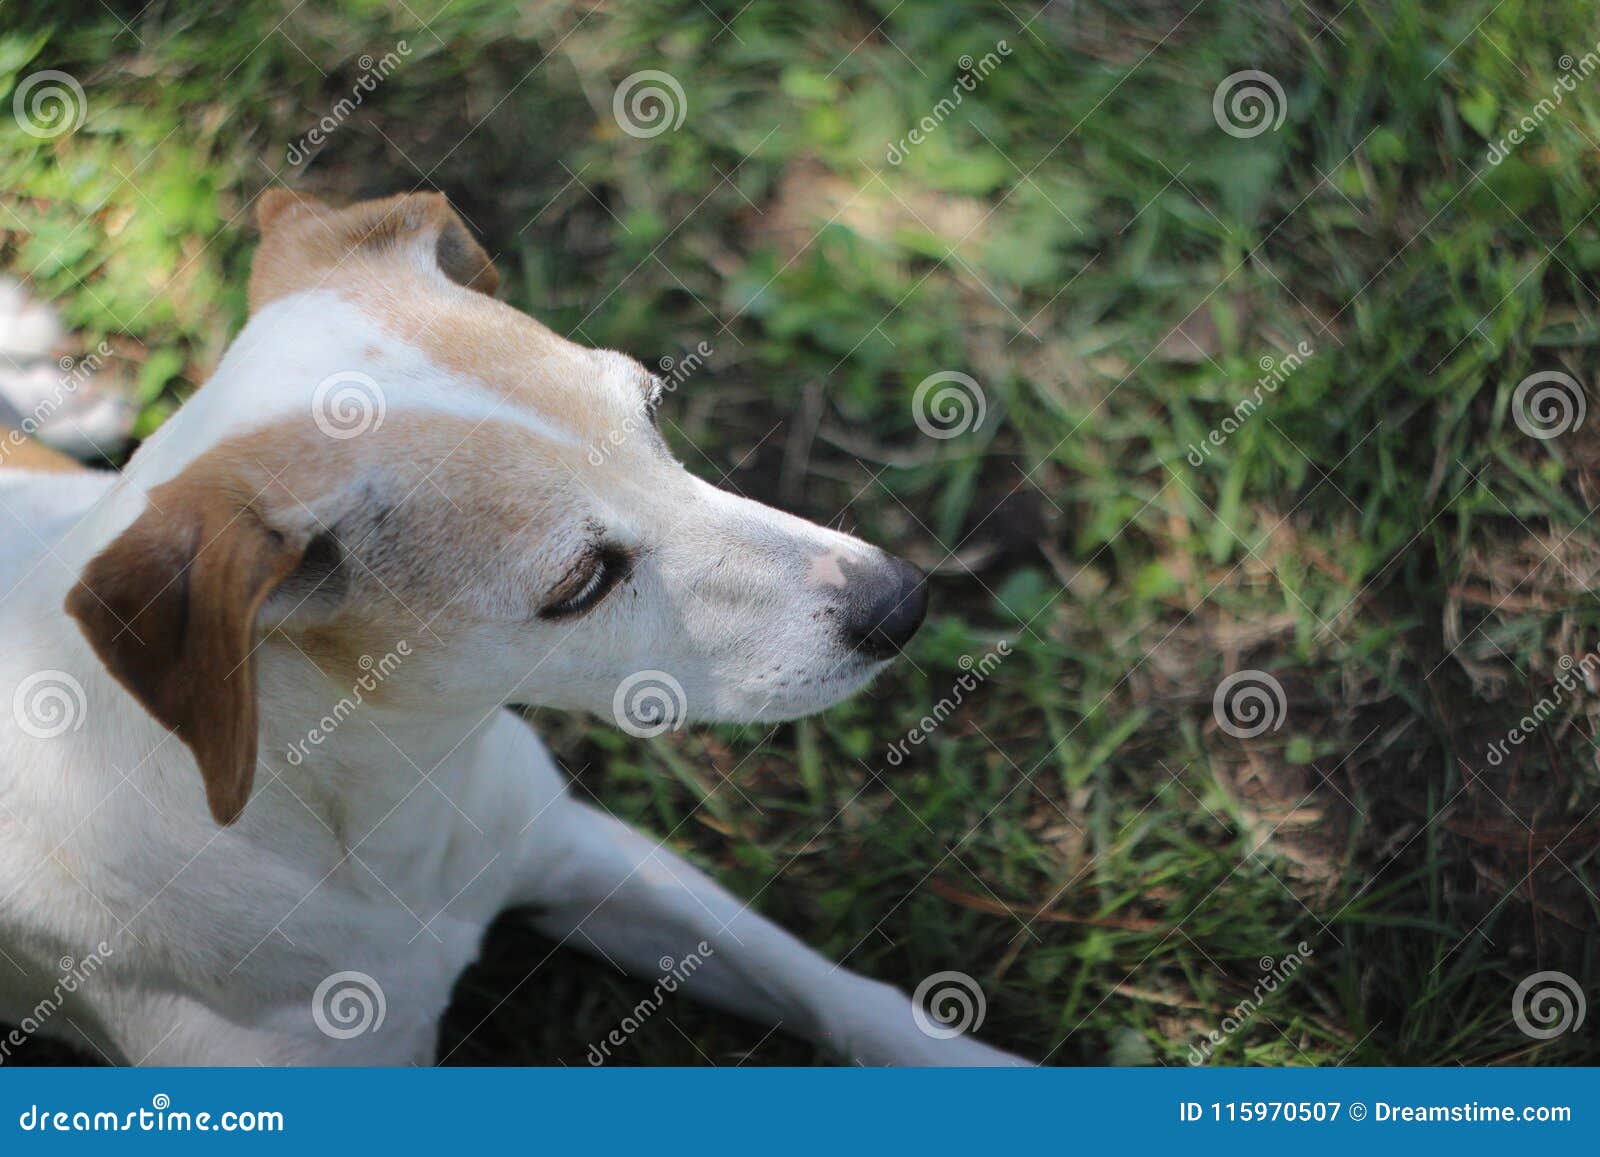 cutest jack russell mixes